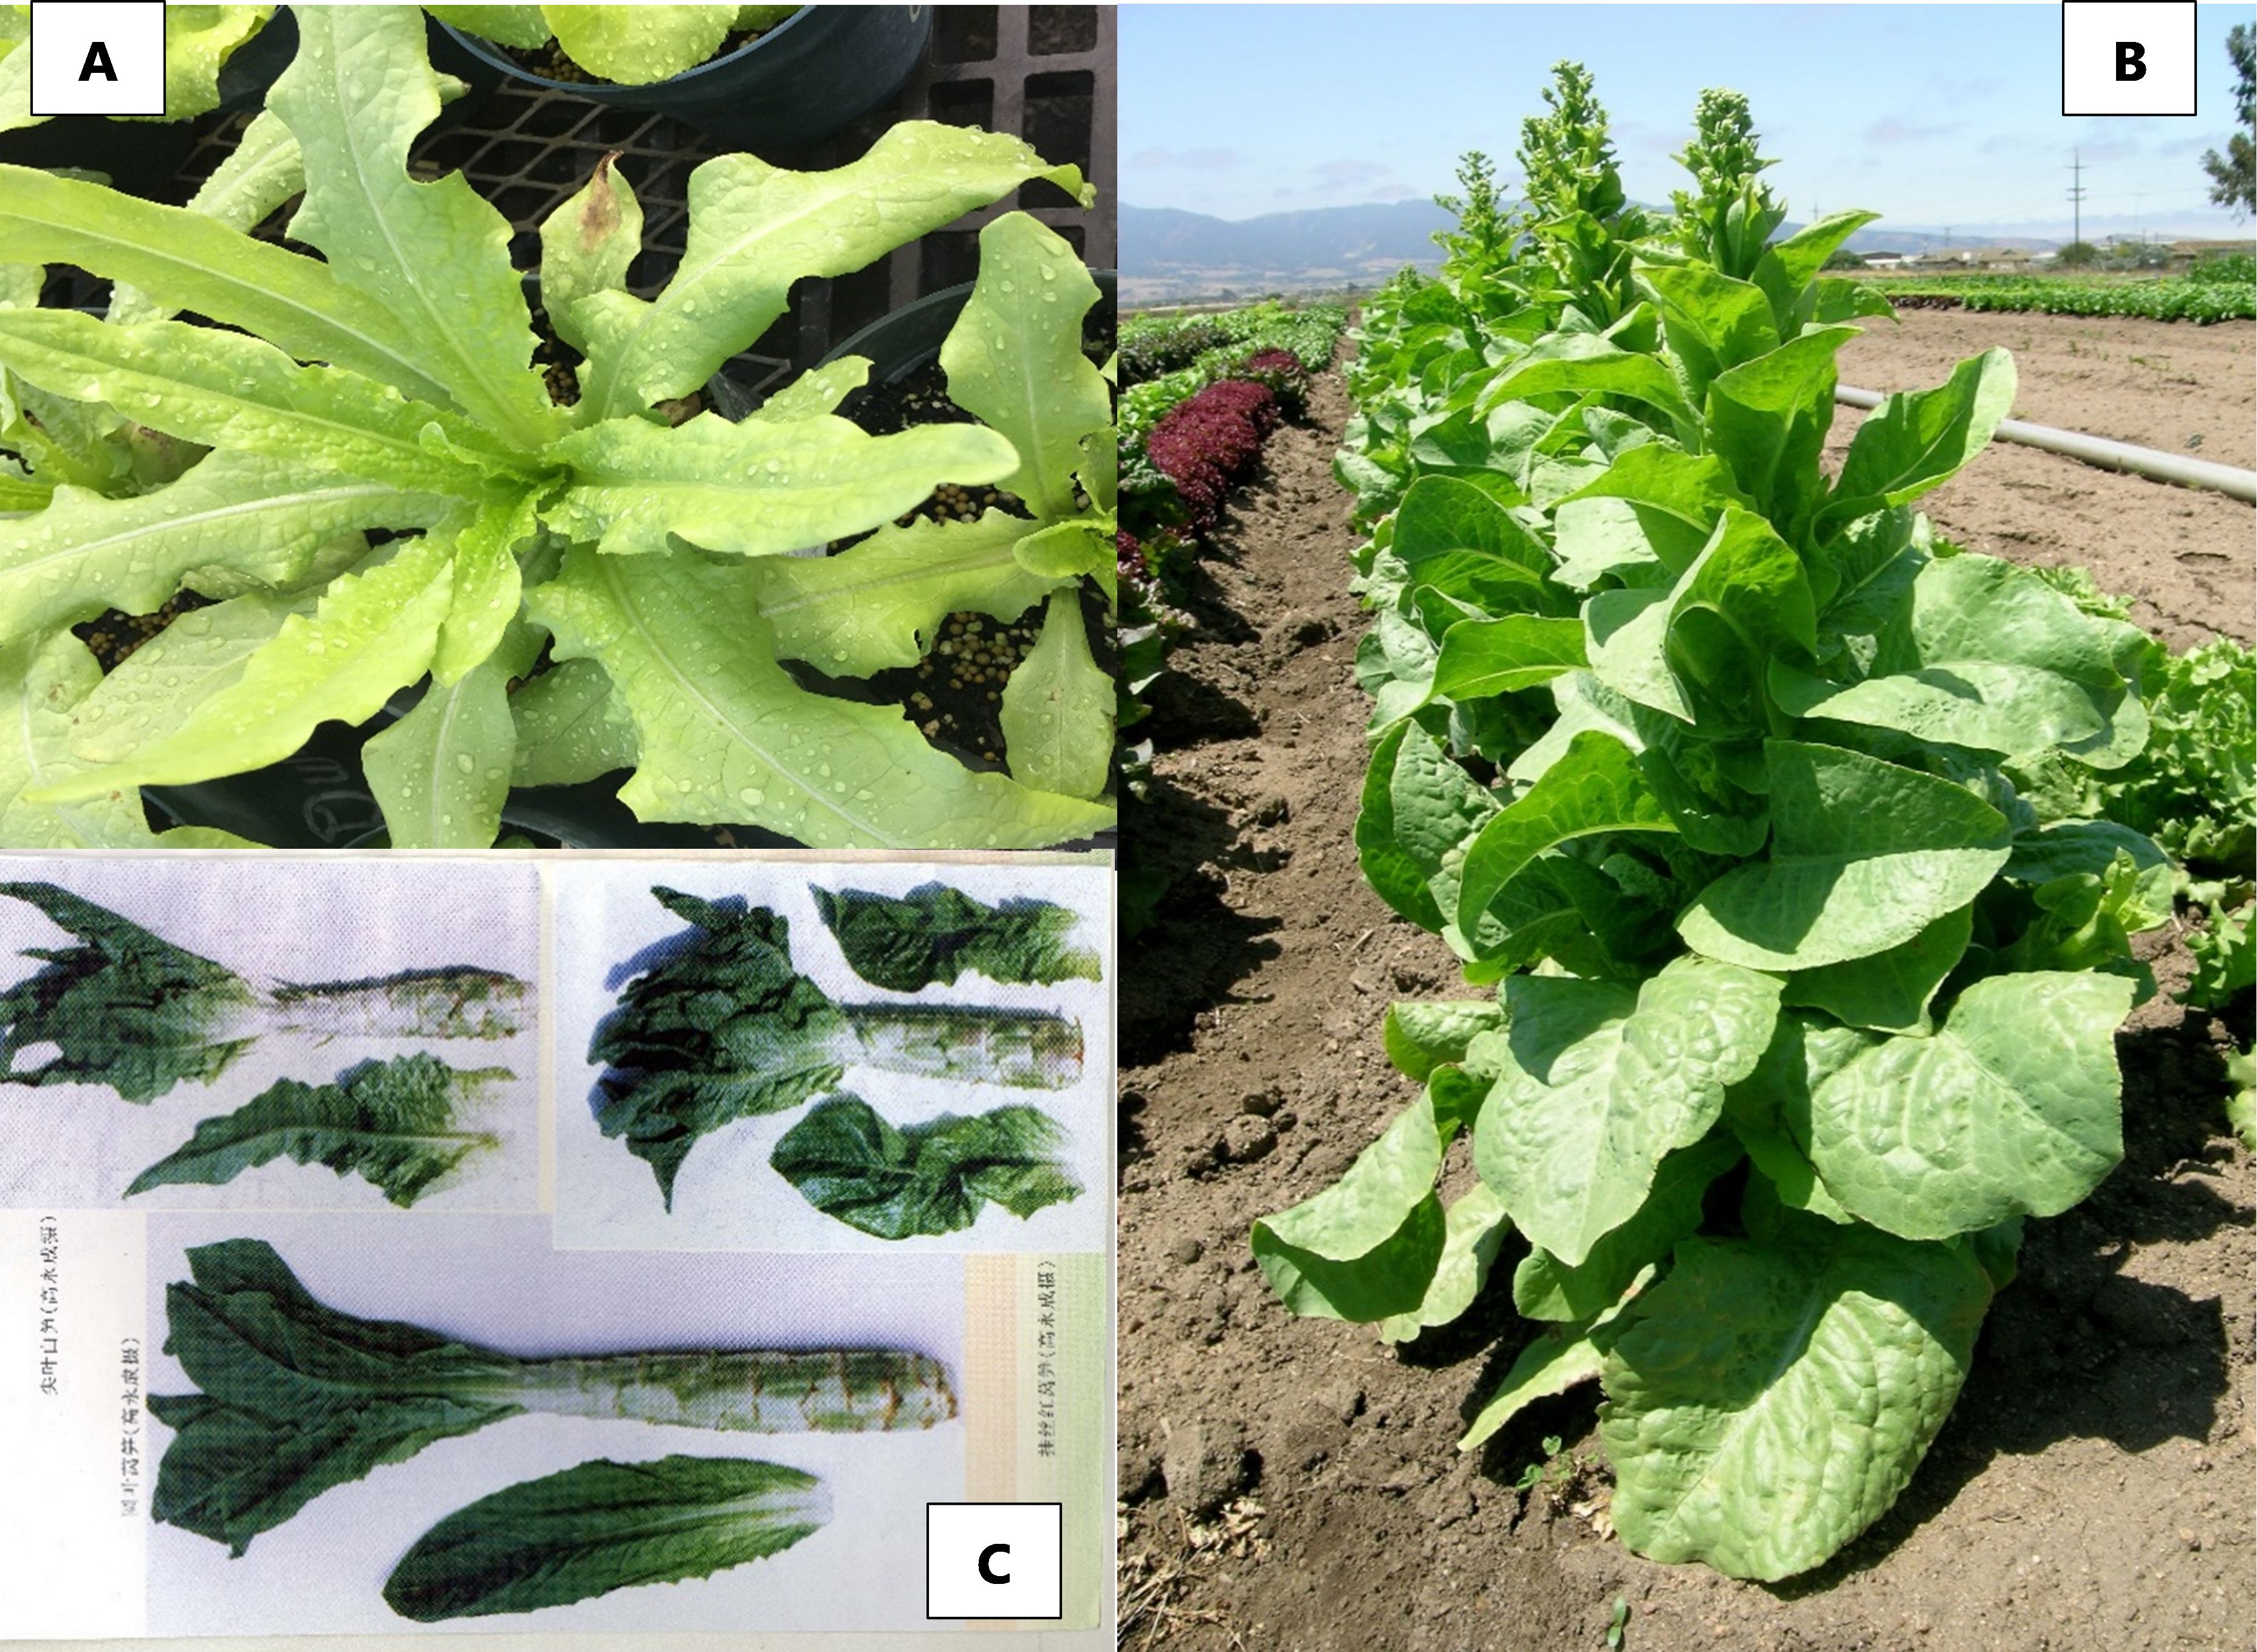 (A) Picture of young stem lettuce cultivar ‘Year Round You Mai’ (Plant Introduction PI 665219) currently deposited at the UF/IFAS lettuce breeding germplasm bank. (B) An adult plant of stem lettuce cultivar ‘Da Ye Wo Sun’ (PI 667840) grown in the Salinas Valley of California. (C) Harvested stem lettuce as it is used in the Asian cuisine; the edible parts are the stem in contrast to other lettuce types.